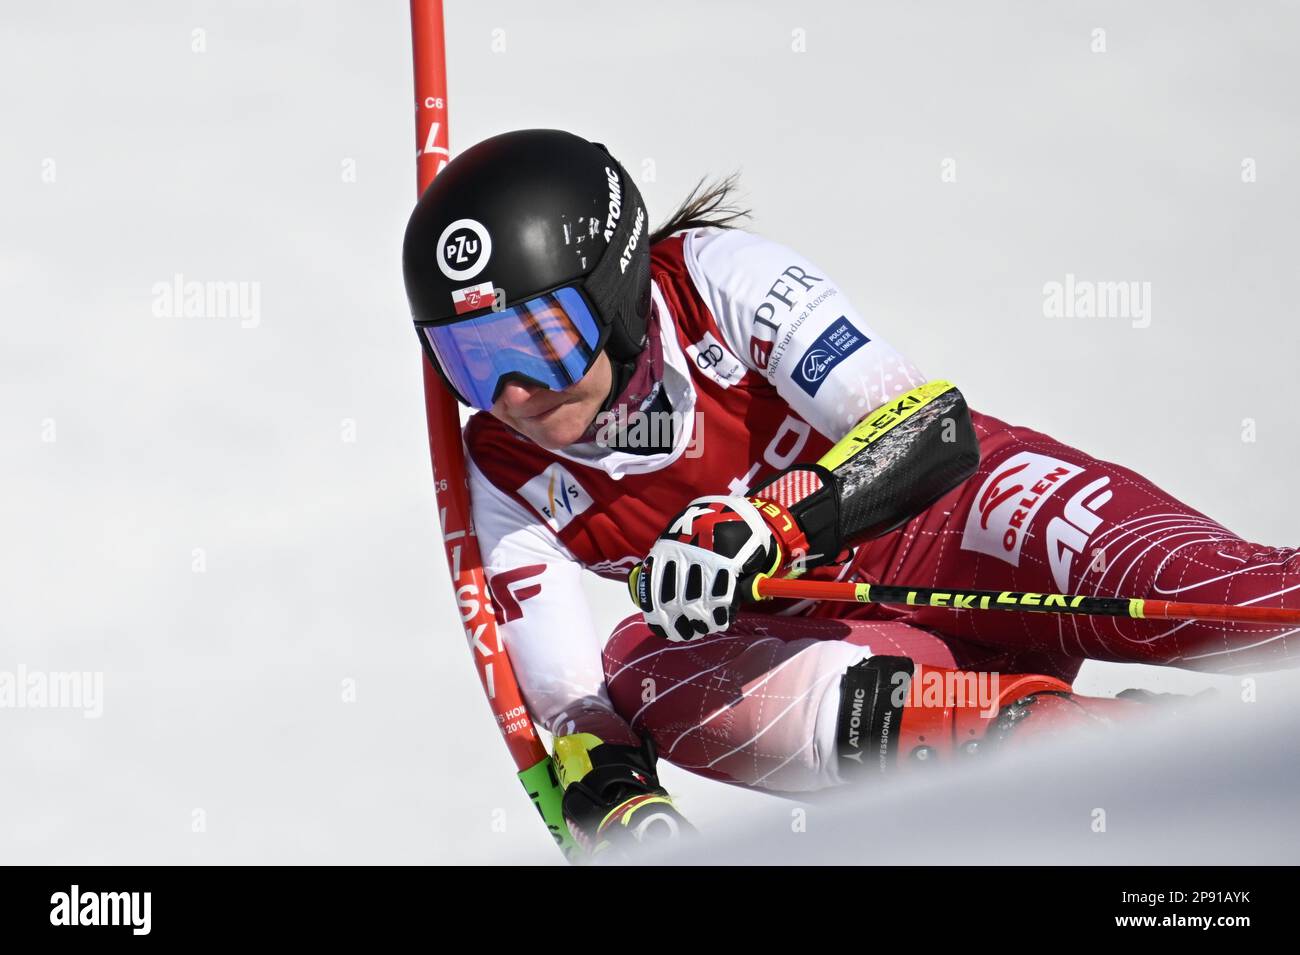 YEAR 20230310 Maryna Gasienica-Daniel, Poland, during the first run in the giant slalom competition in the World Cup, Åre.  Photo: Pontus Lundahl / TT Stock Photo